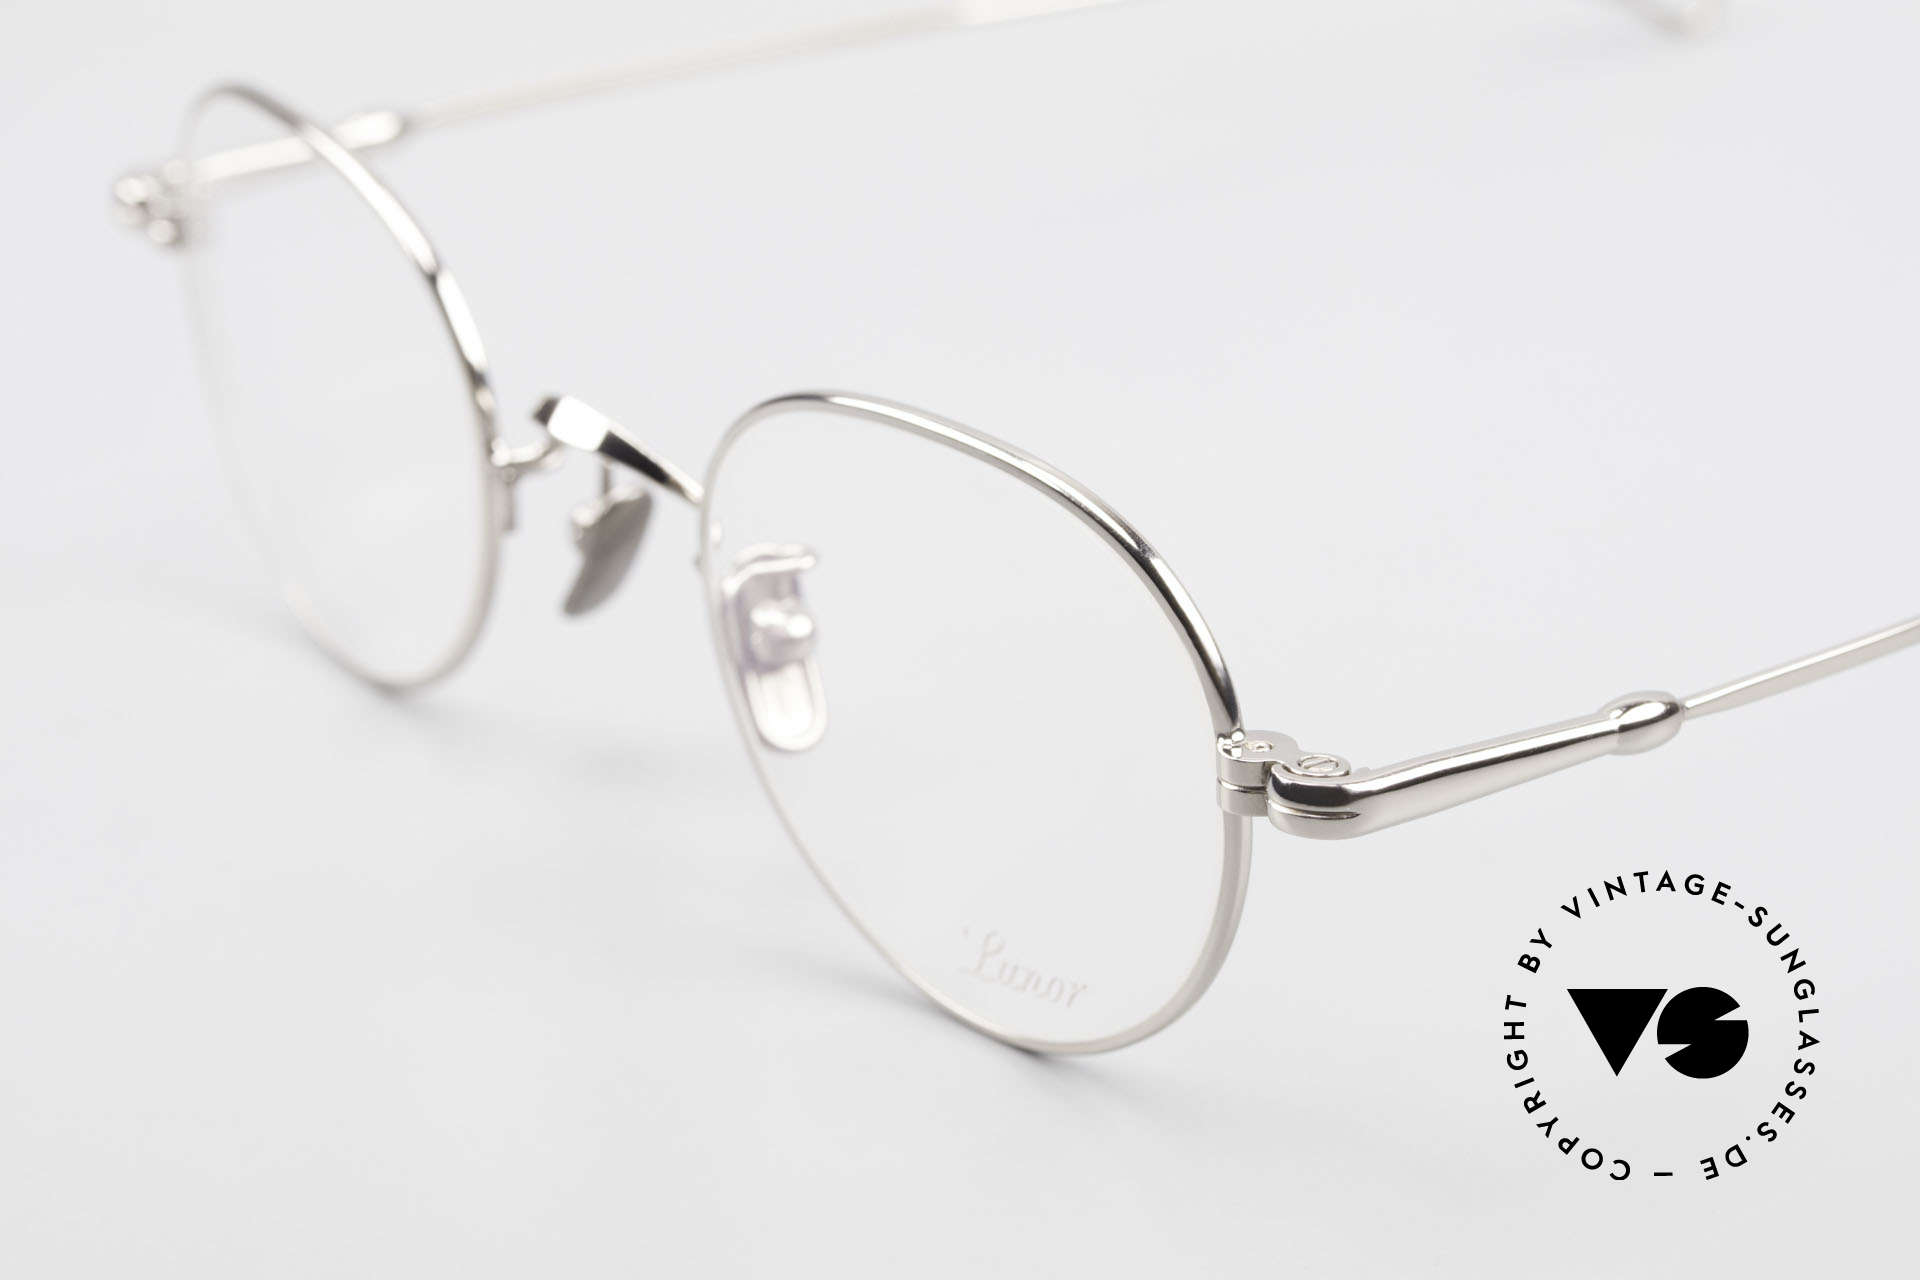 Lunor V 108 Panto Frame Platinum Plated, from the 2011's collection, but in a well-known quality, Made for Men